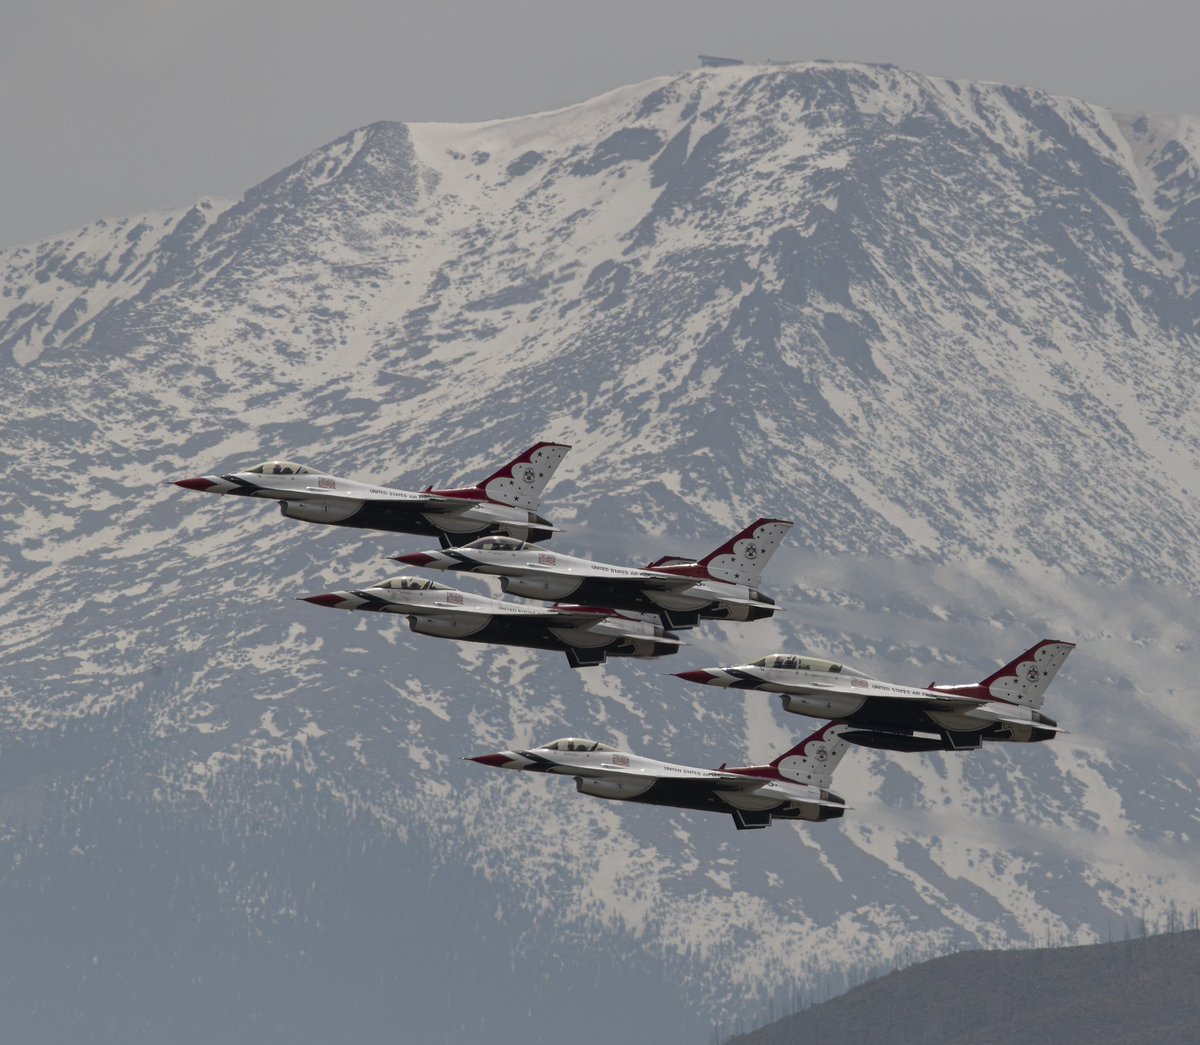 The Air Force Thunderbirds flying in front of Pikes Peak. #Colorado #Cowx #photography